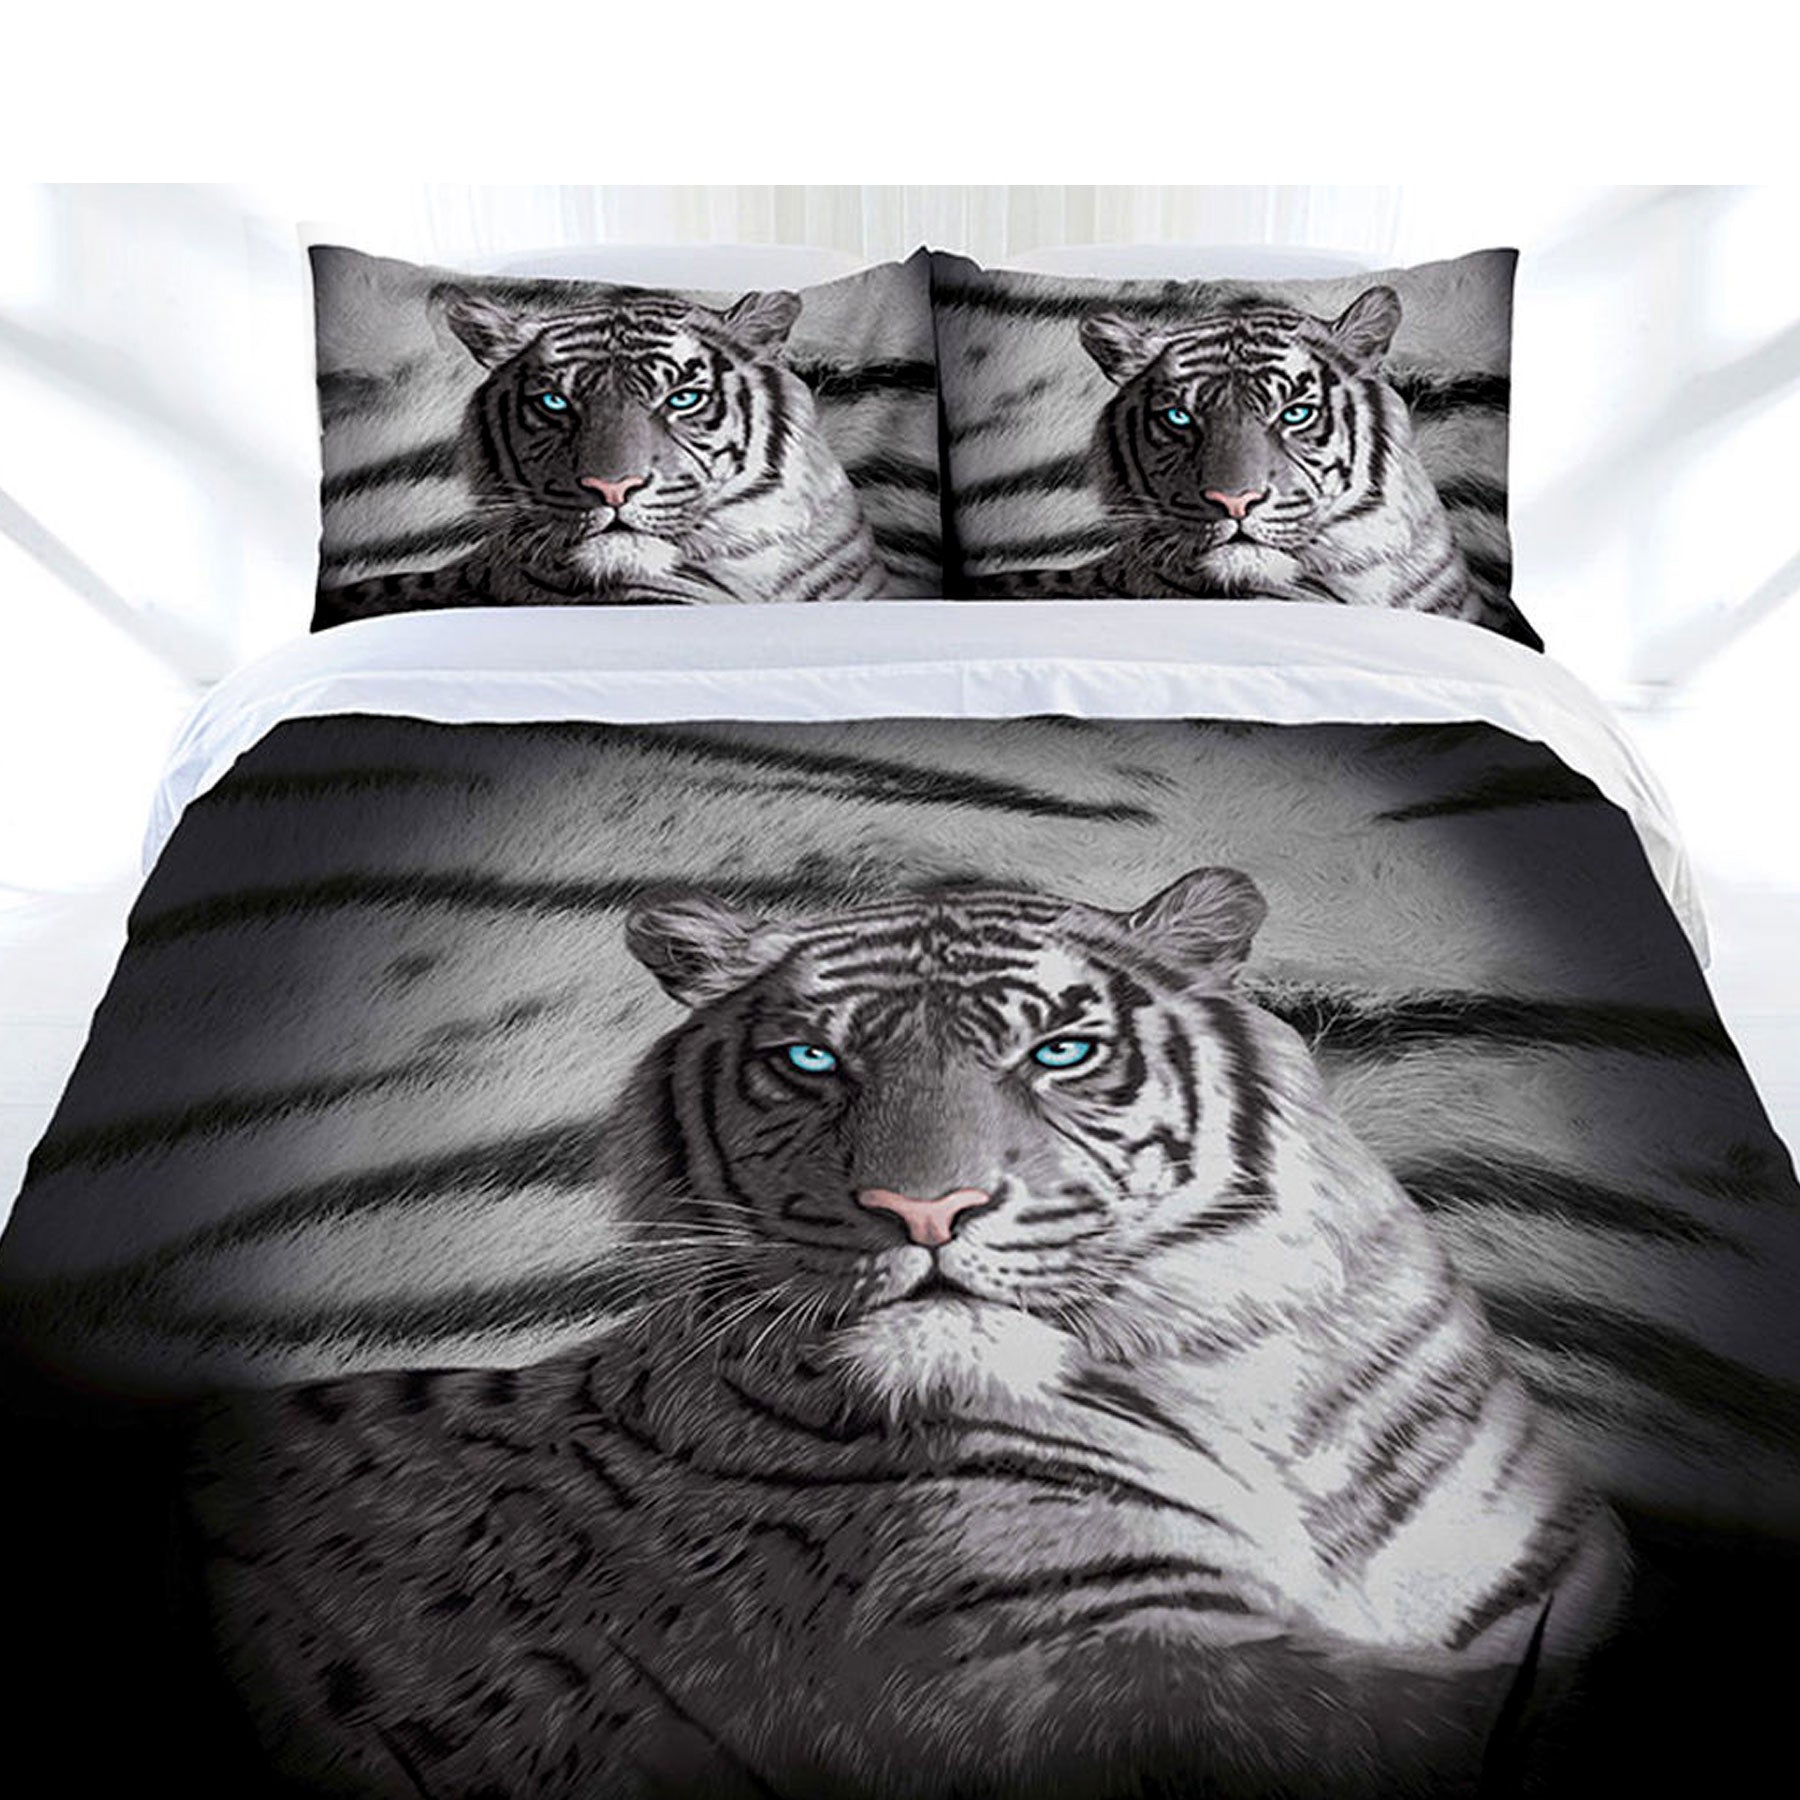 Just Home Blue Eyes Stripes Tiger Quilt Cover Set Double